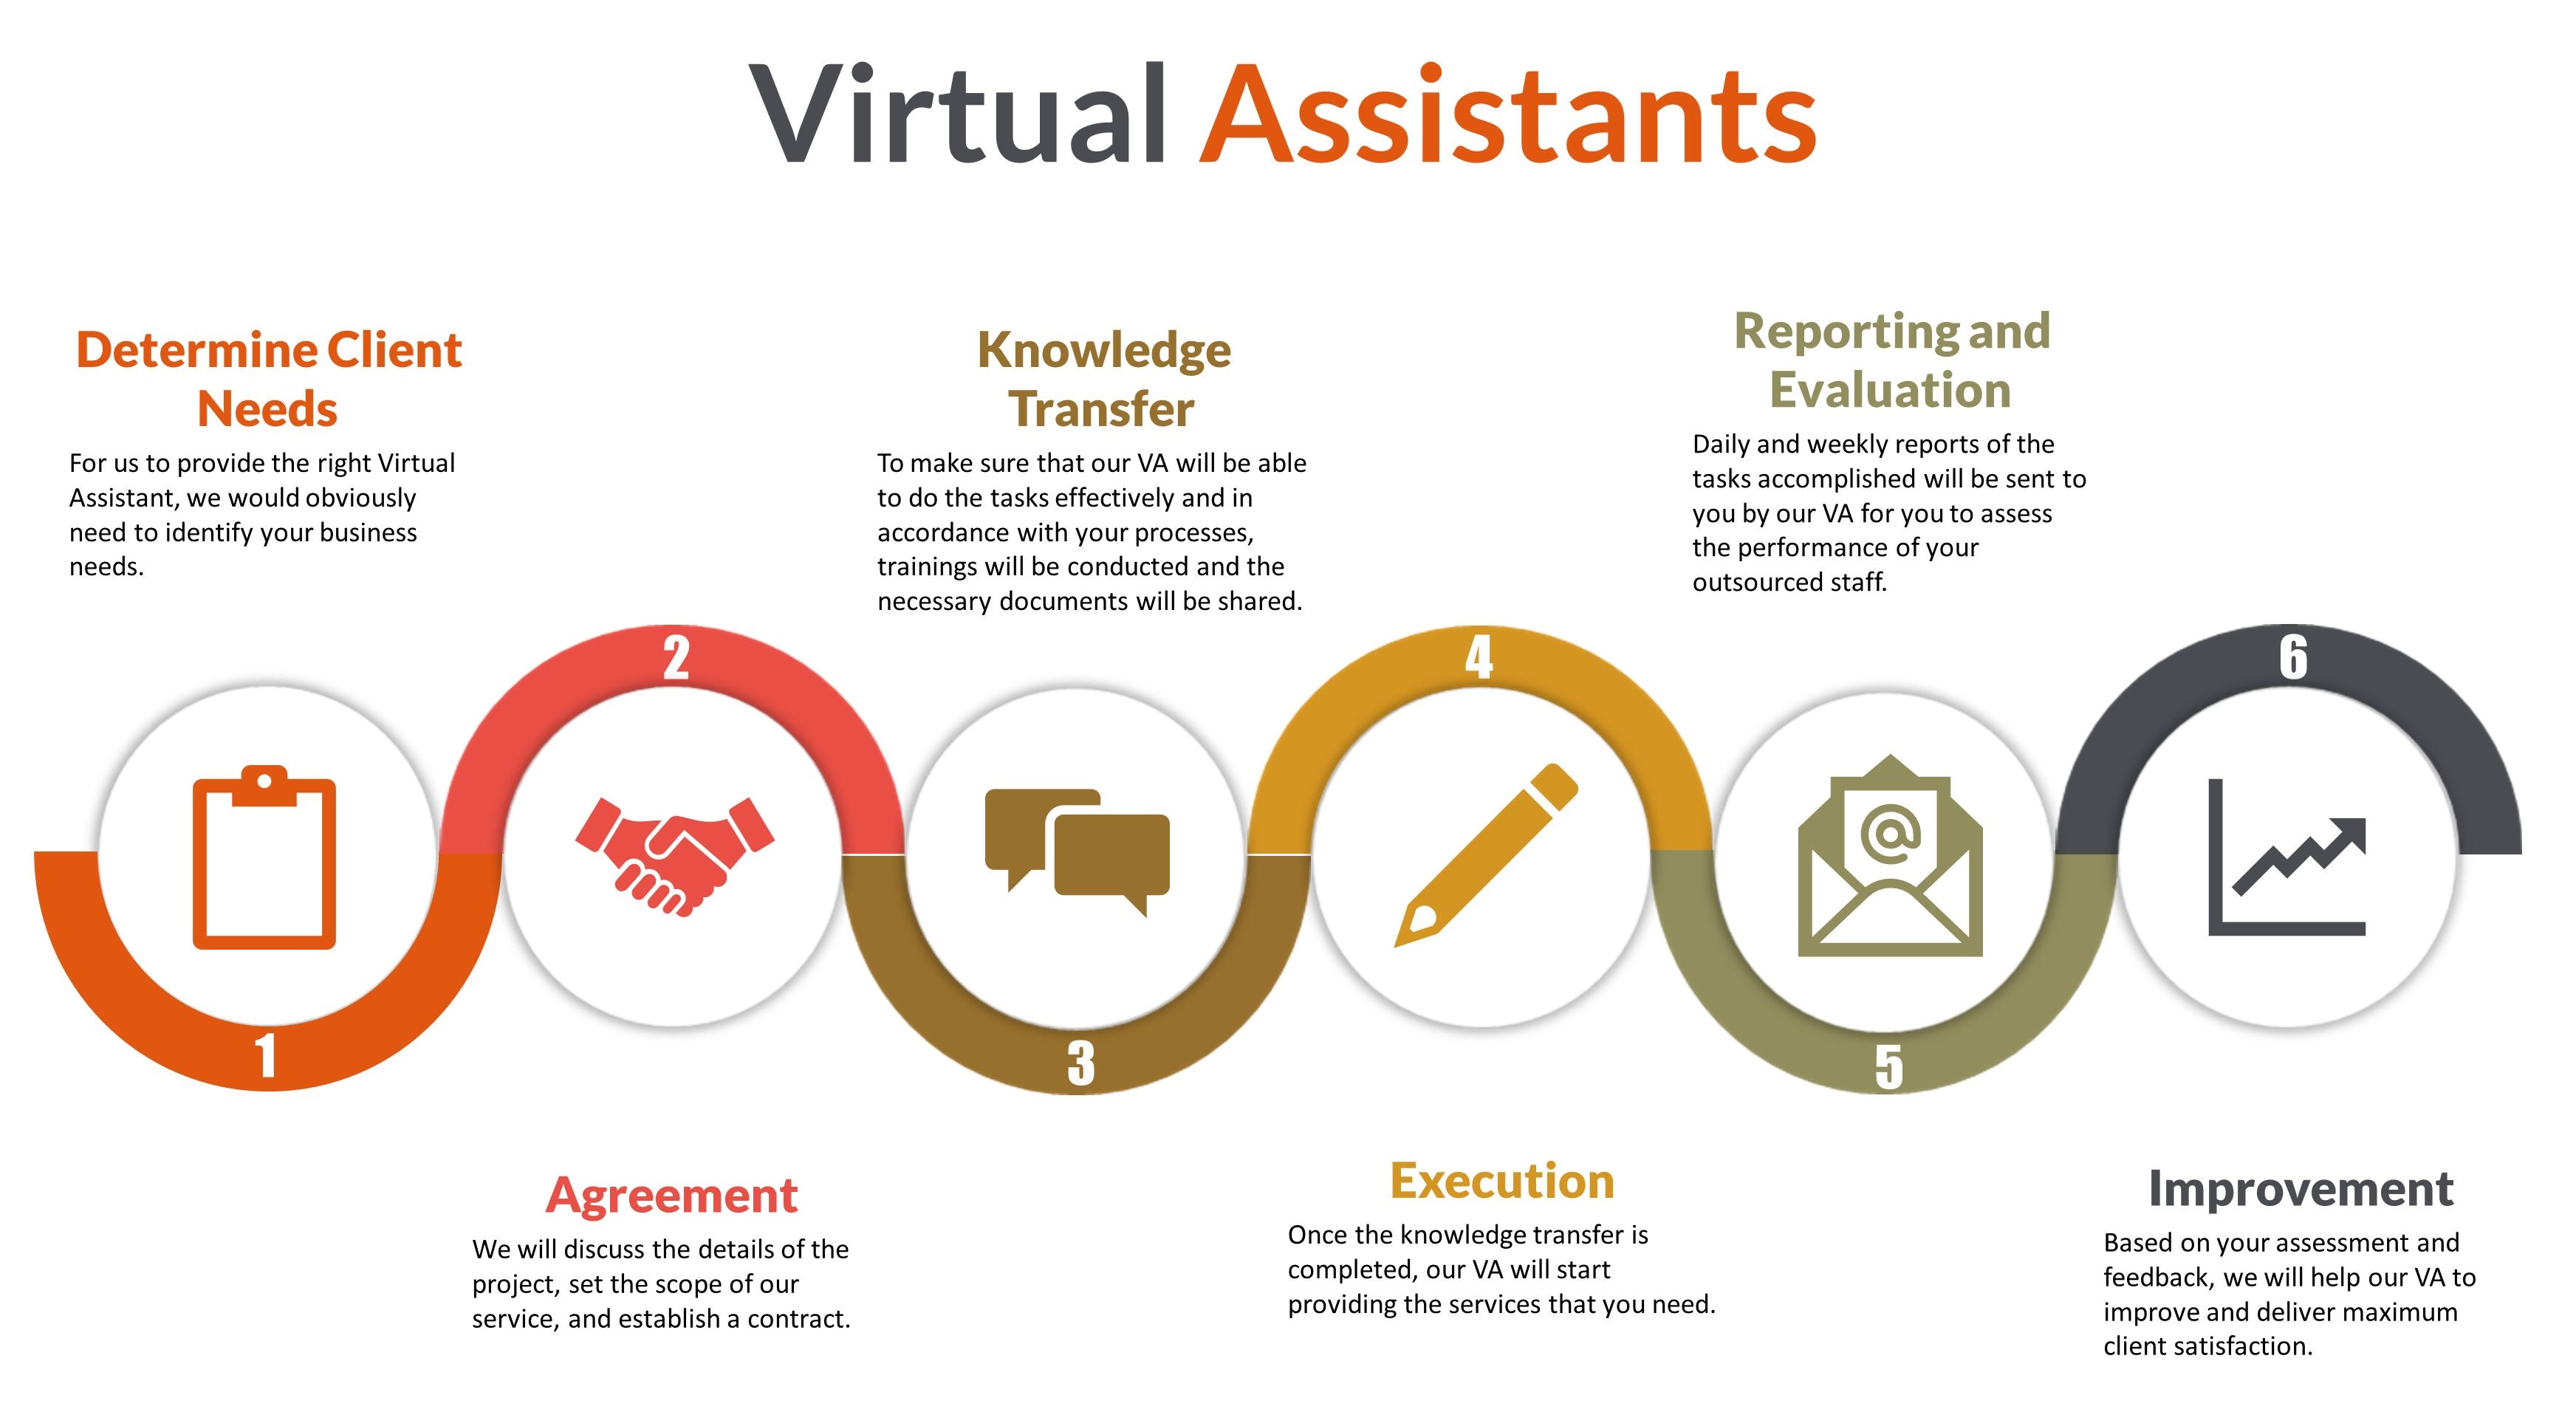 Be your virtual assistant